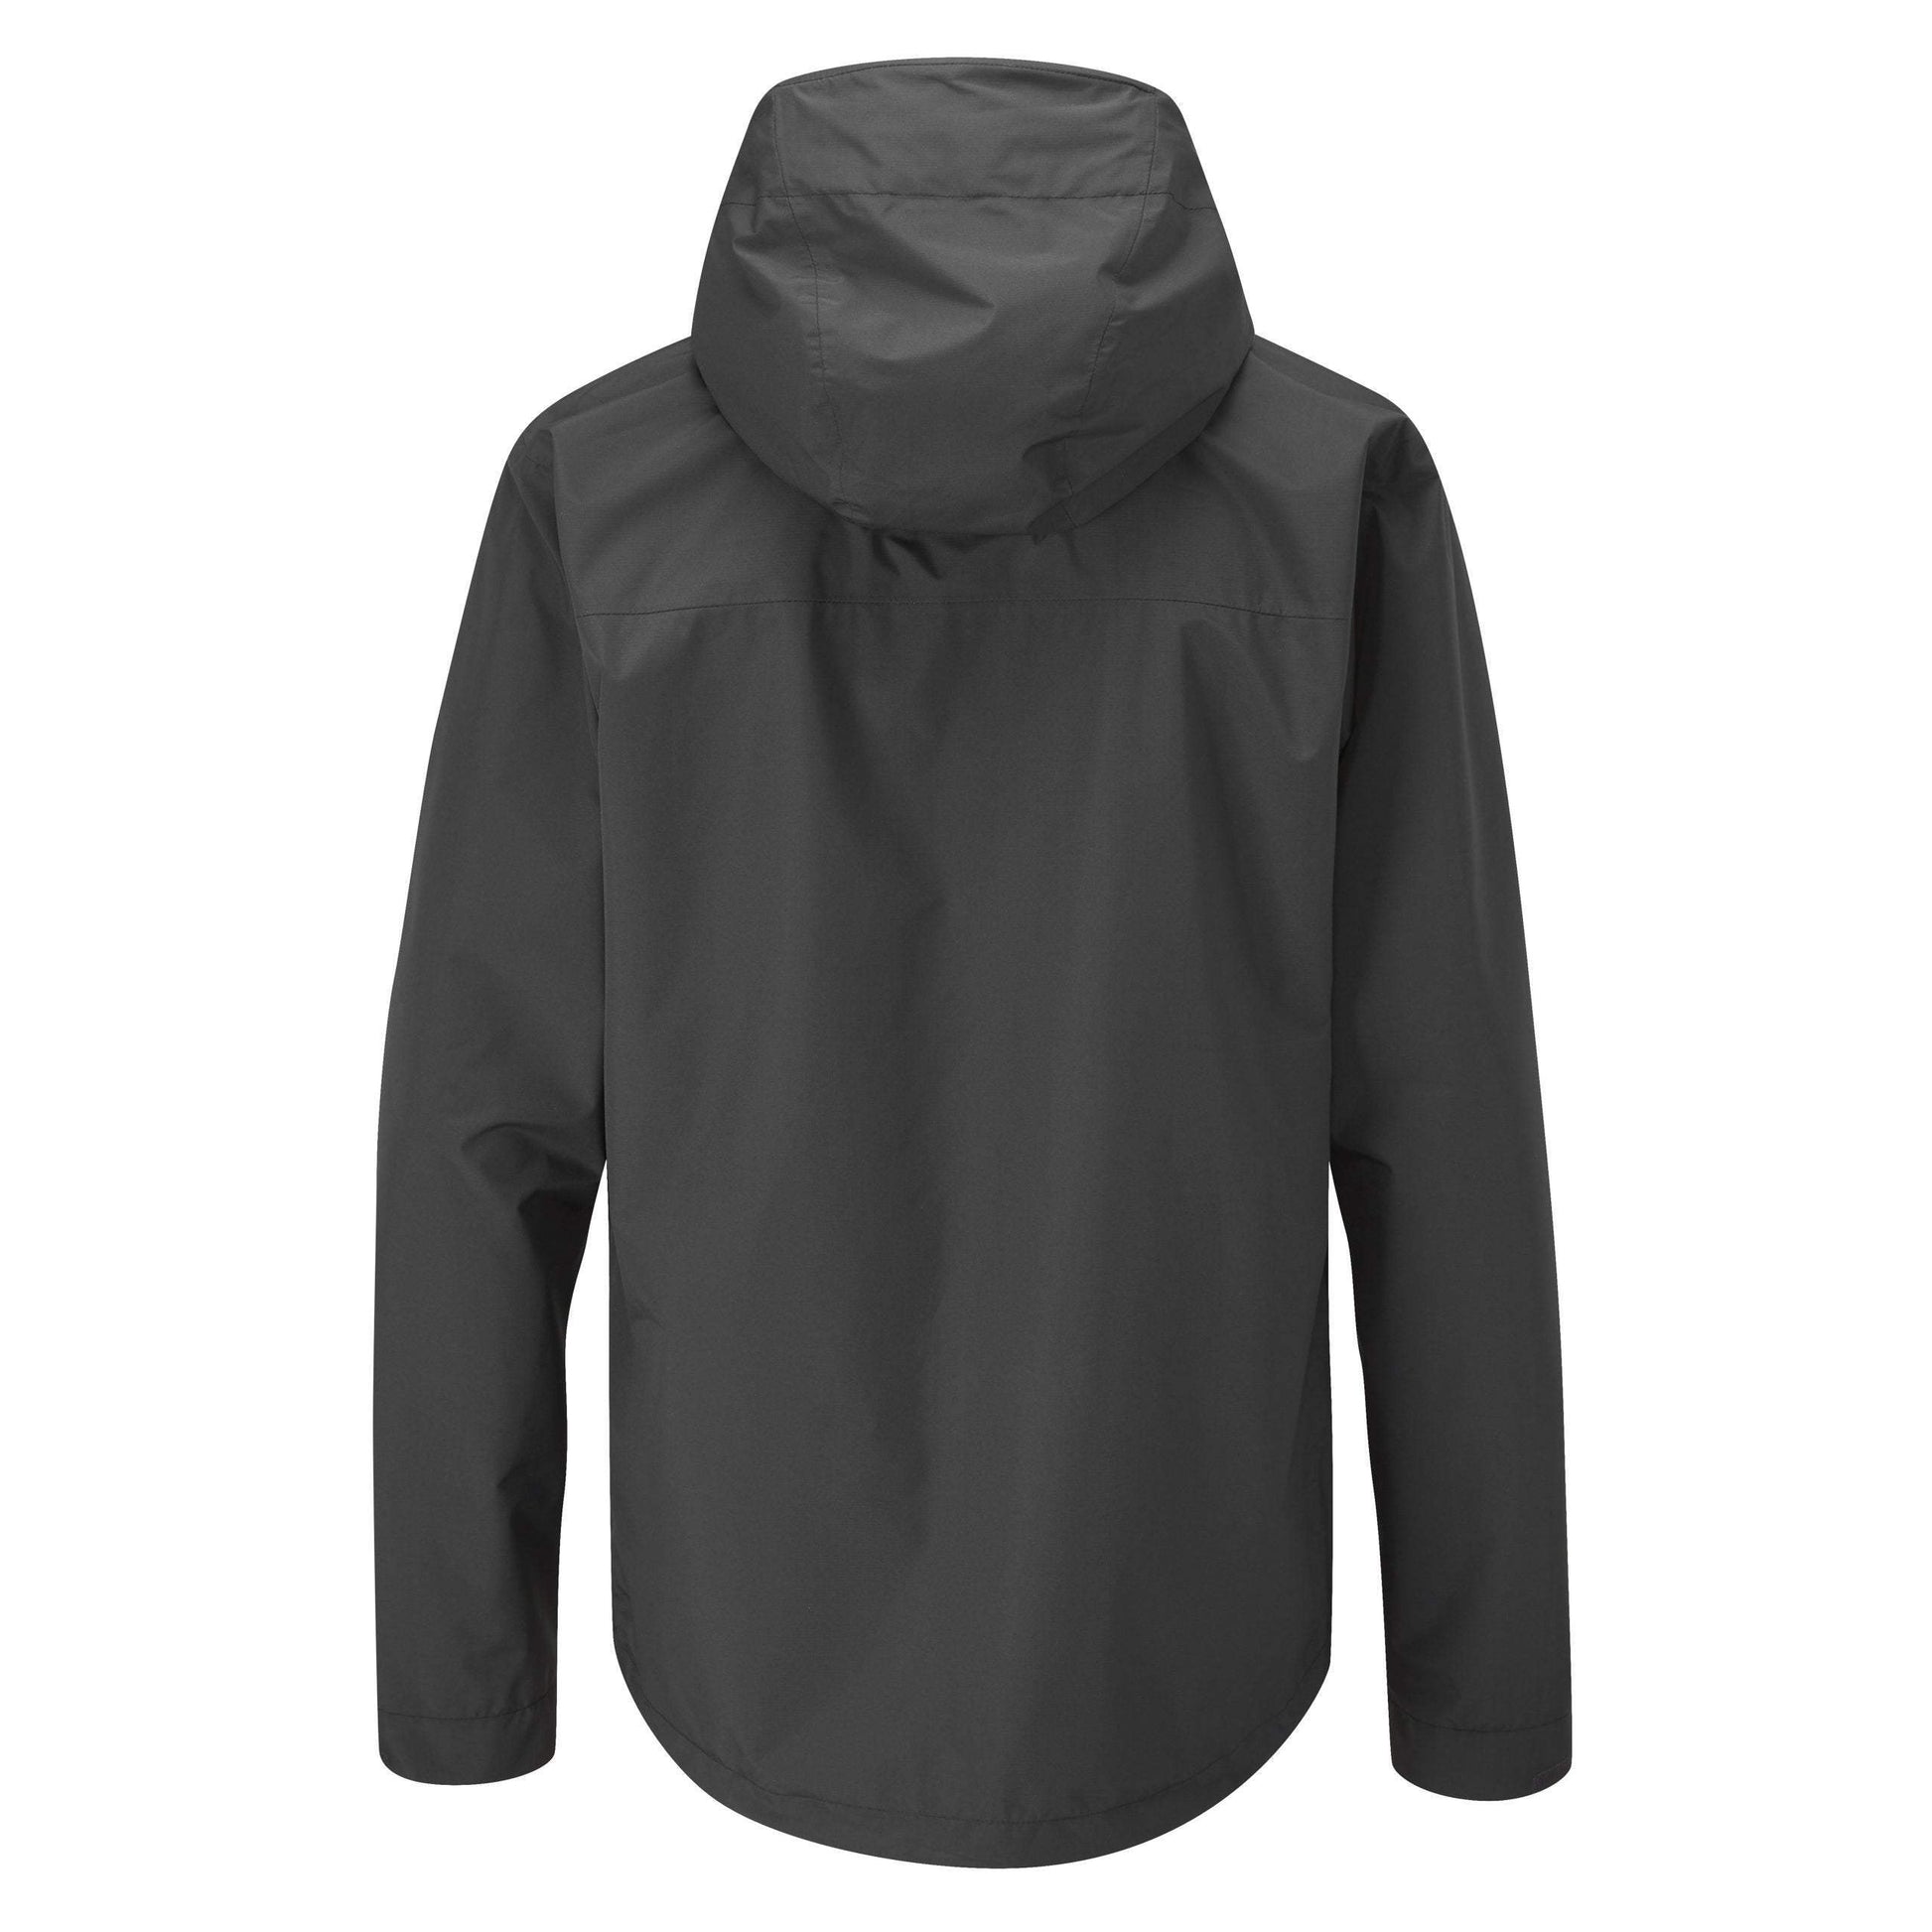 Men’s Downpour Eco Jacket by RAB - The Luxury Promotional Gifts Company Limited